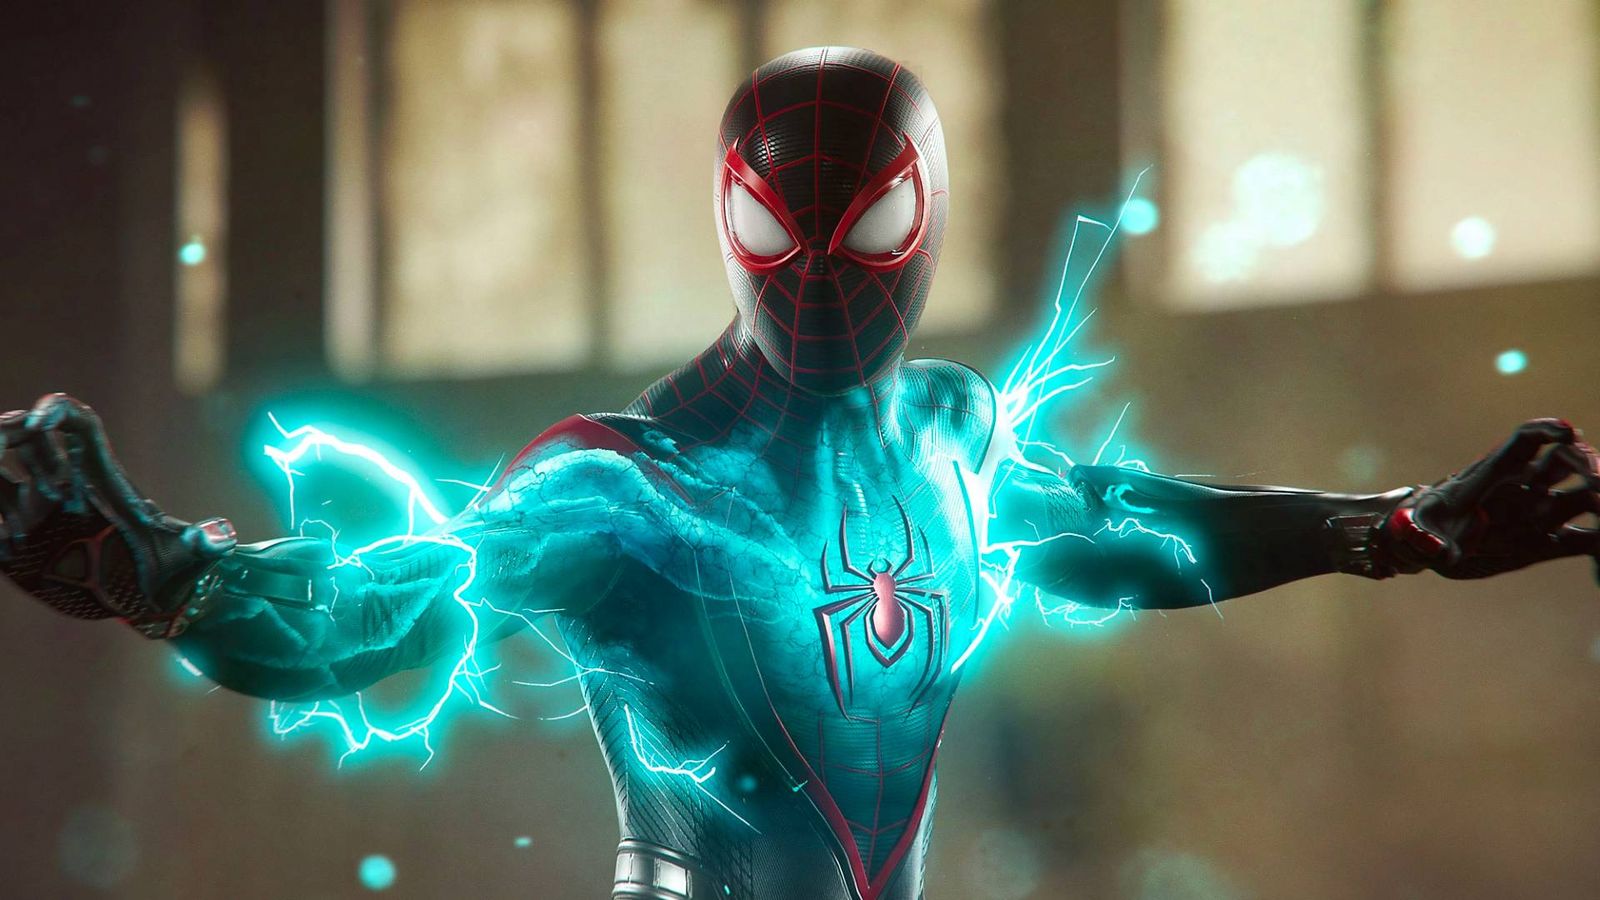 Miles Morales charging up an electric power in Spider-Man 2.